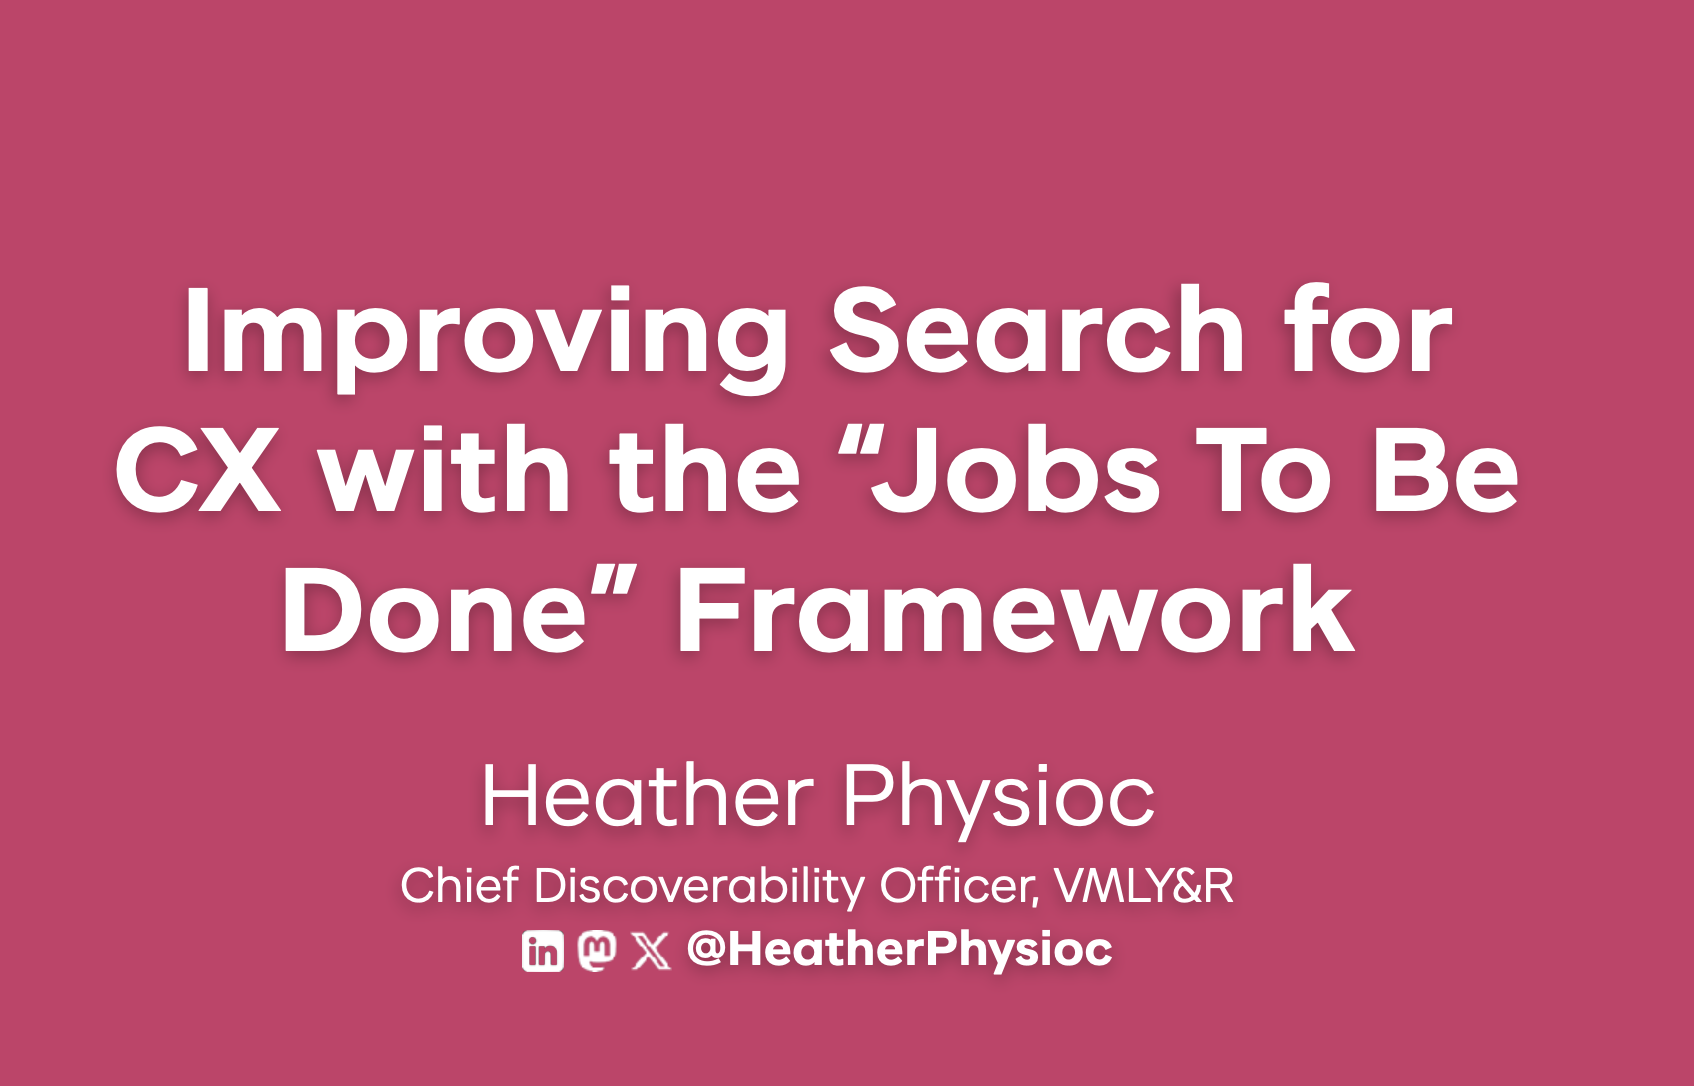 Marketing Keynote: Improving Search for CX with the "Jobs to be Done" Framework